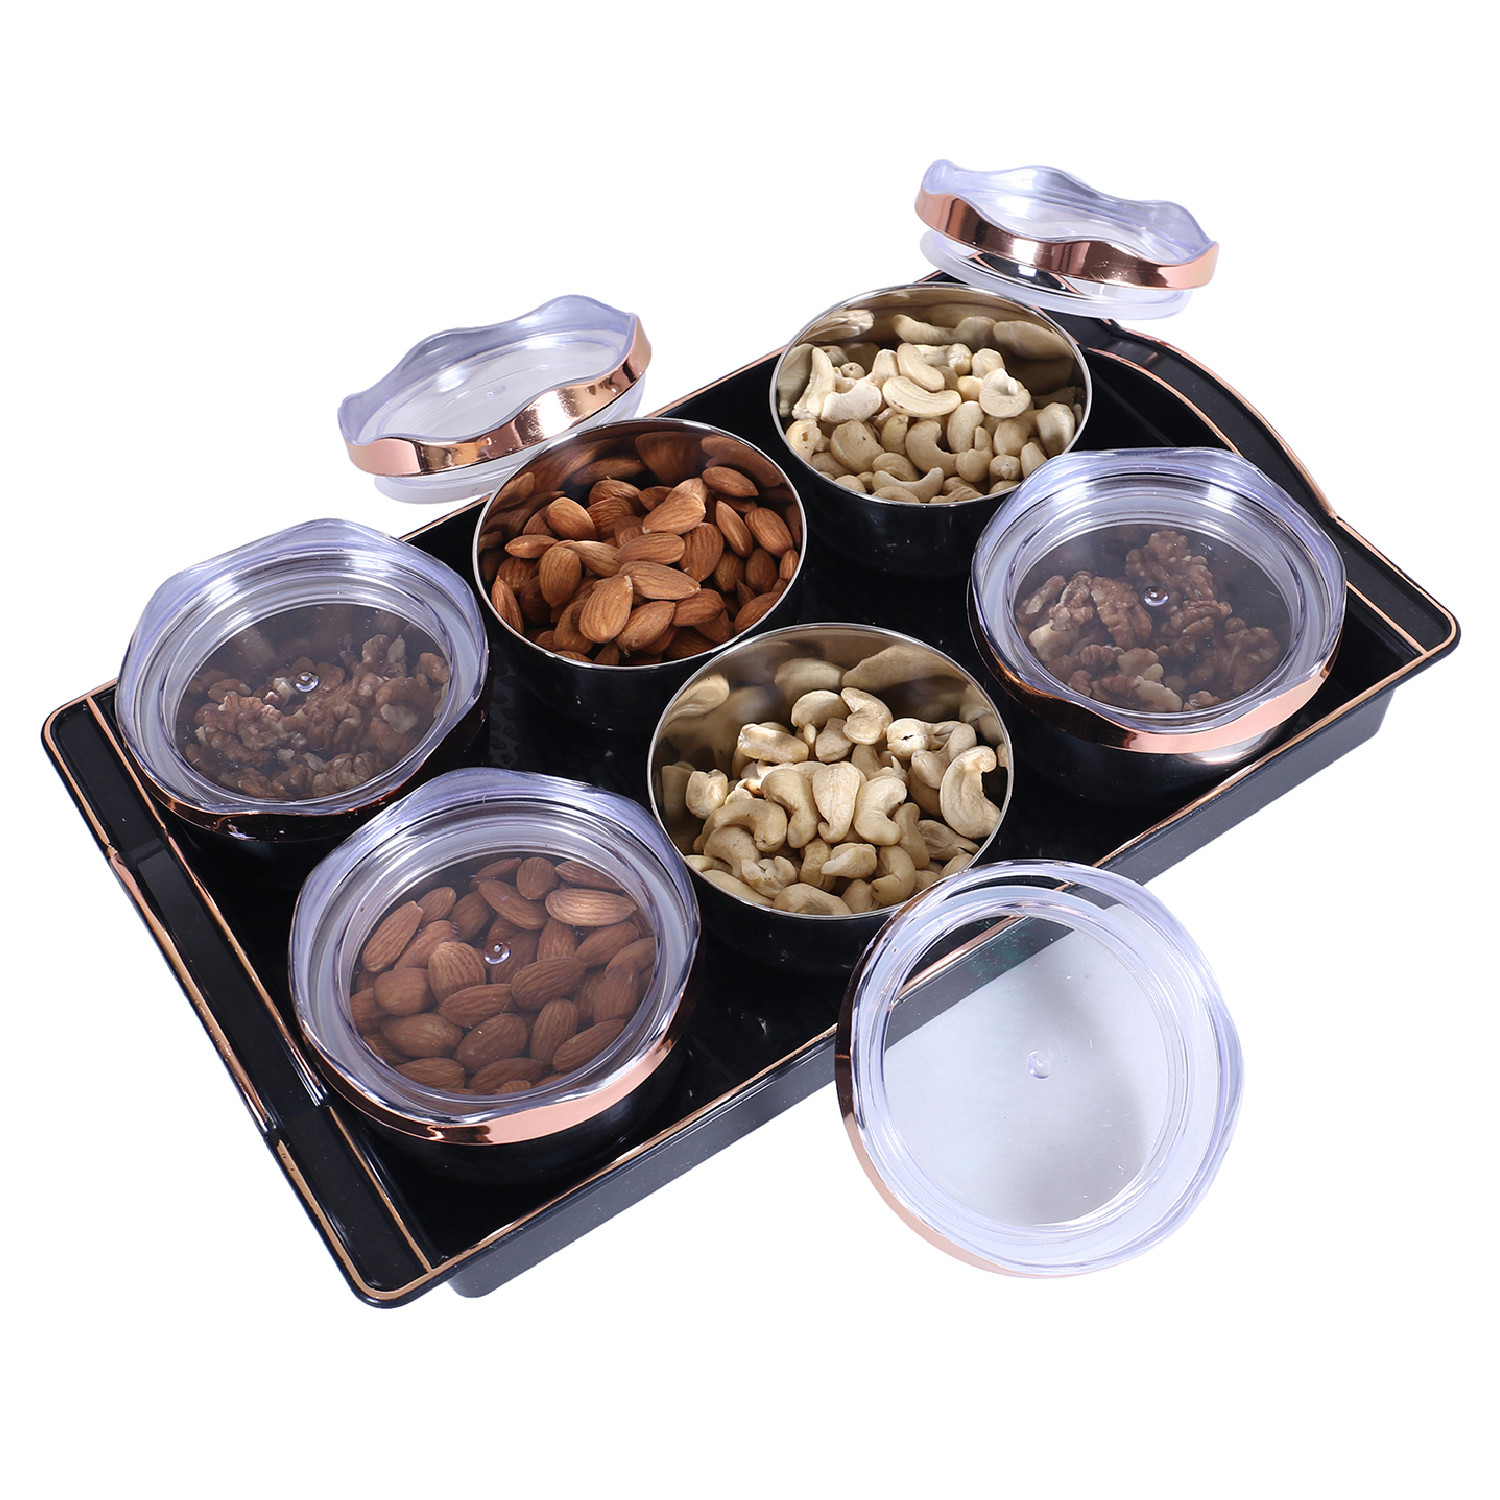 Kuber Industries 6 Containers & Plastic Tray Set|Stainless Steel Snackers,Cookies,Nuts Serving Bowls|Airtight Containers with Lid,300 ml (Black)